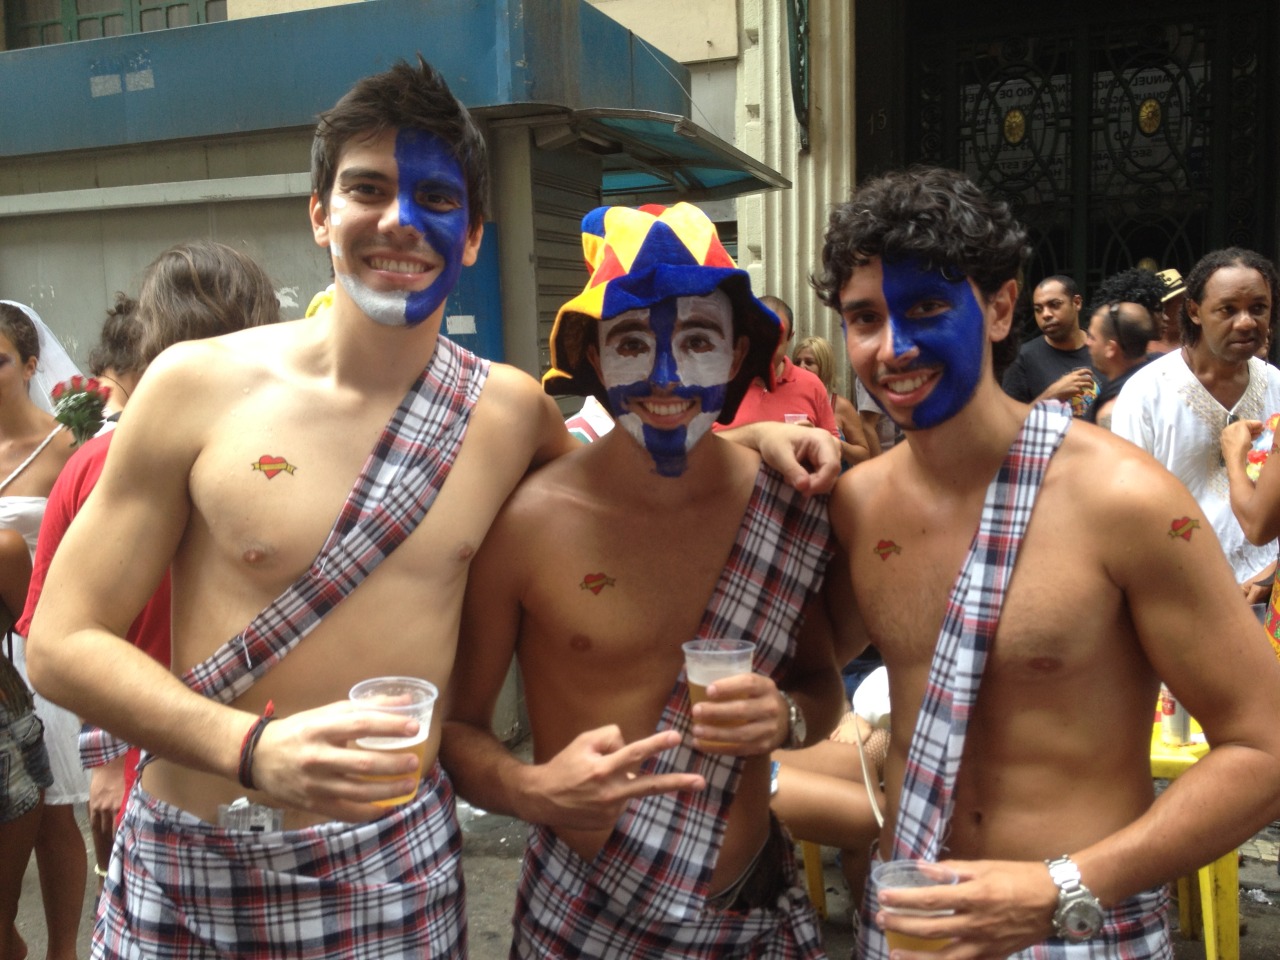 Carnival players in Rio de Janeiro proudly showing their MBMR tattoos. Lots of men supported the campaign, Brave Hearteds inclusive. 10k temporary tattoos were distributed during Carnival in 3 different Brazilian cities, being 7k in Rio de Janeiro.